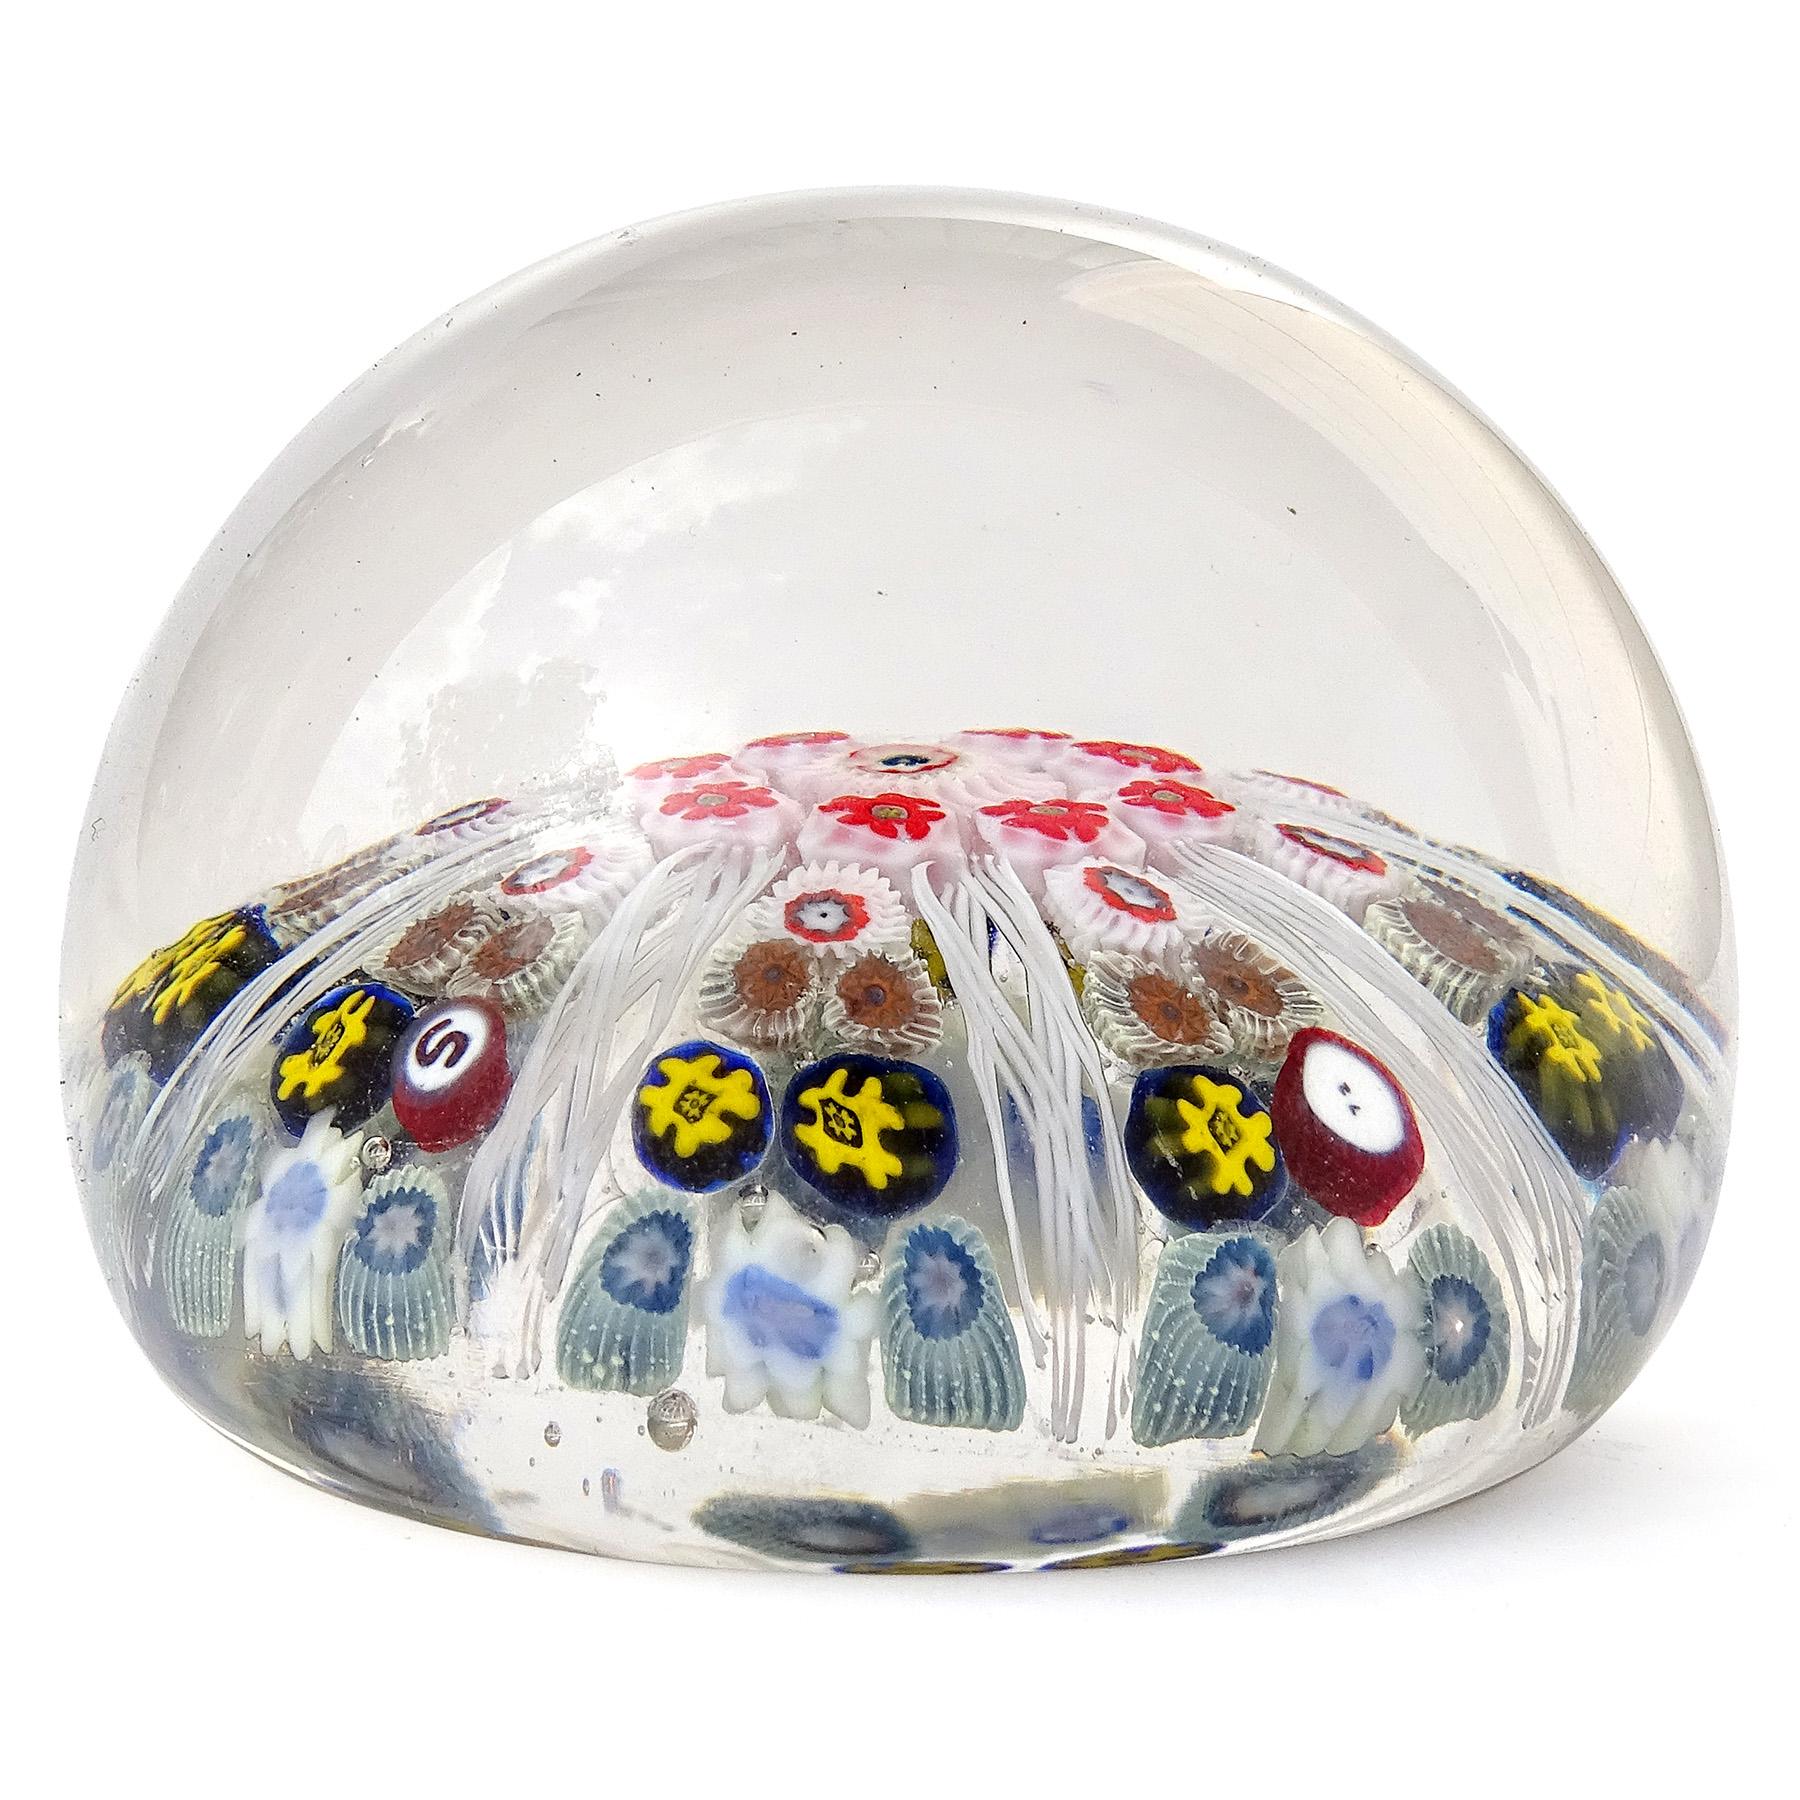 Beautiful vintage Strathearn hand blown millefiori flowers, white ribbons, hand made in Scotland art glass paperweight. It has 2 added murrines, one with the letter 